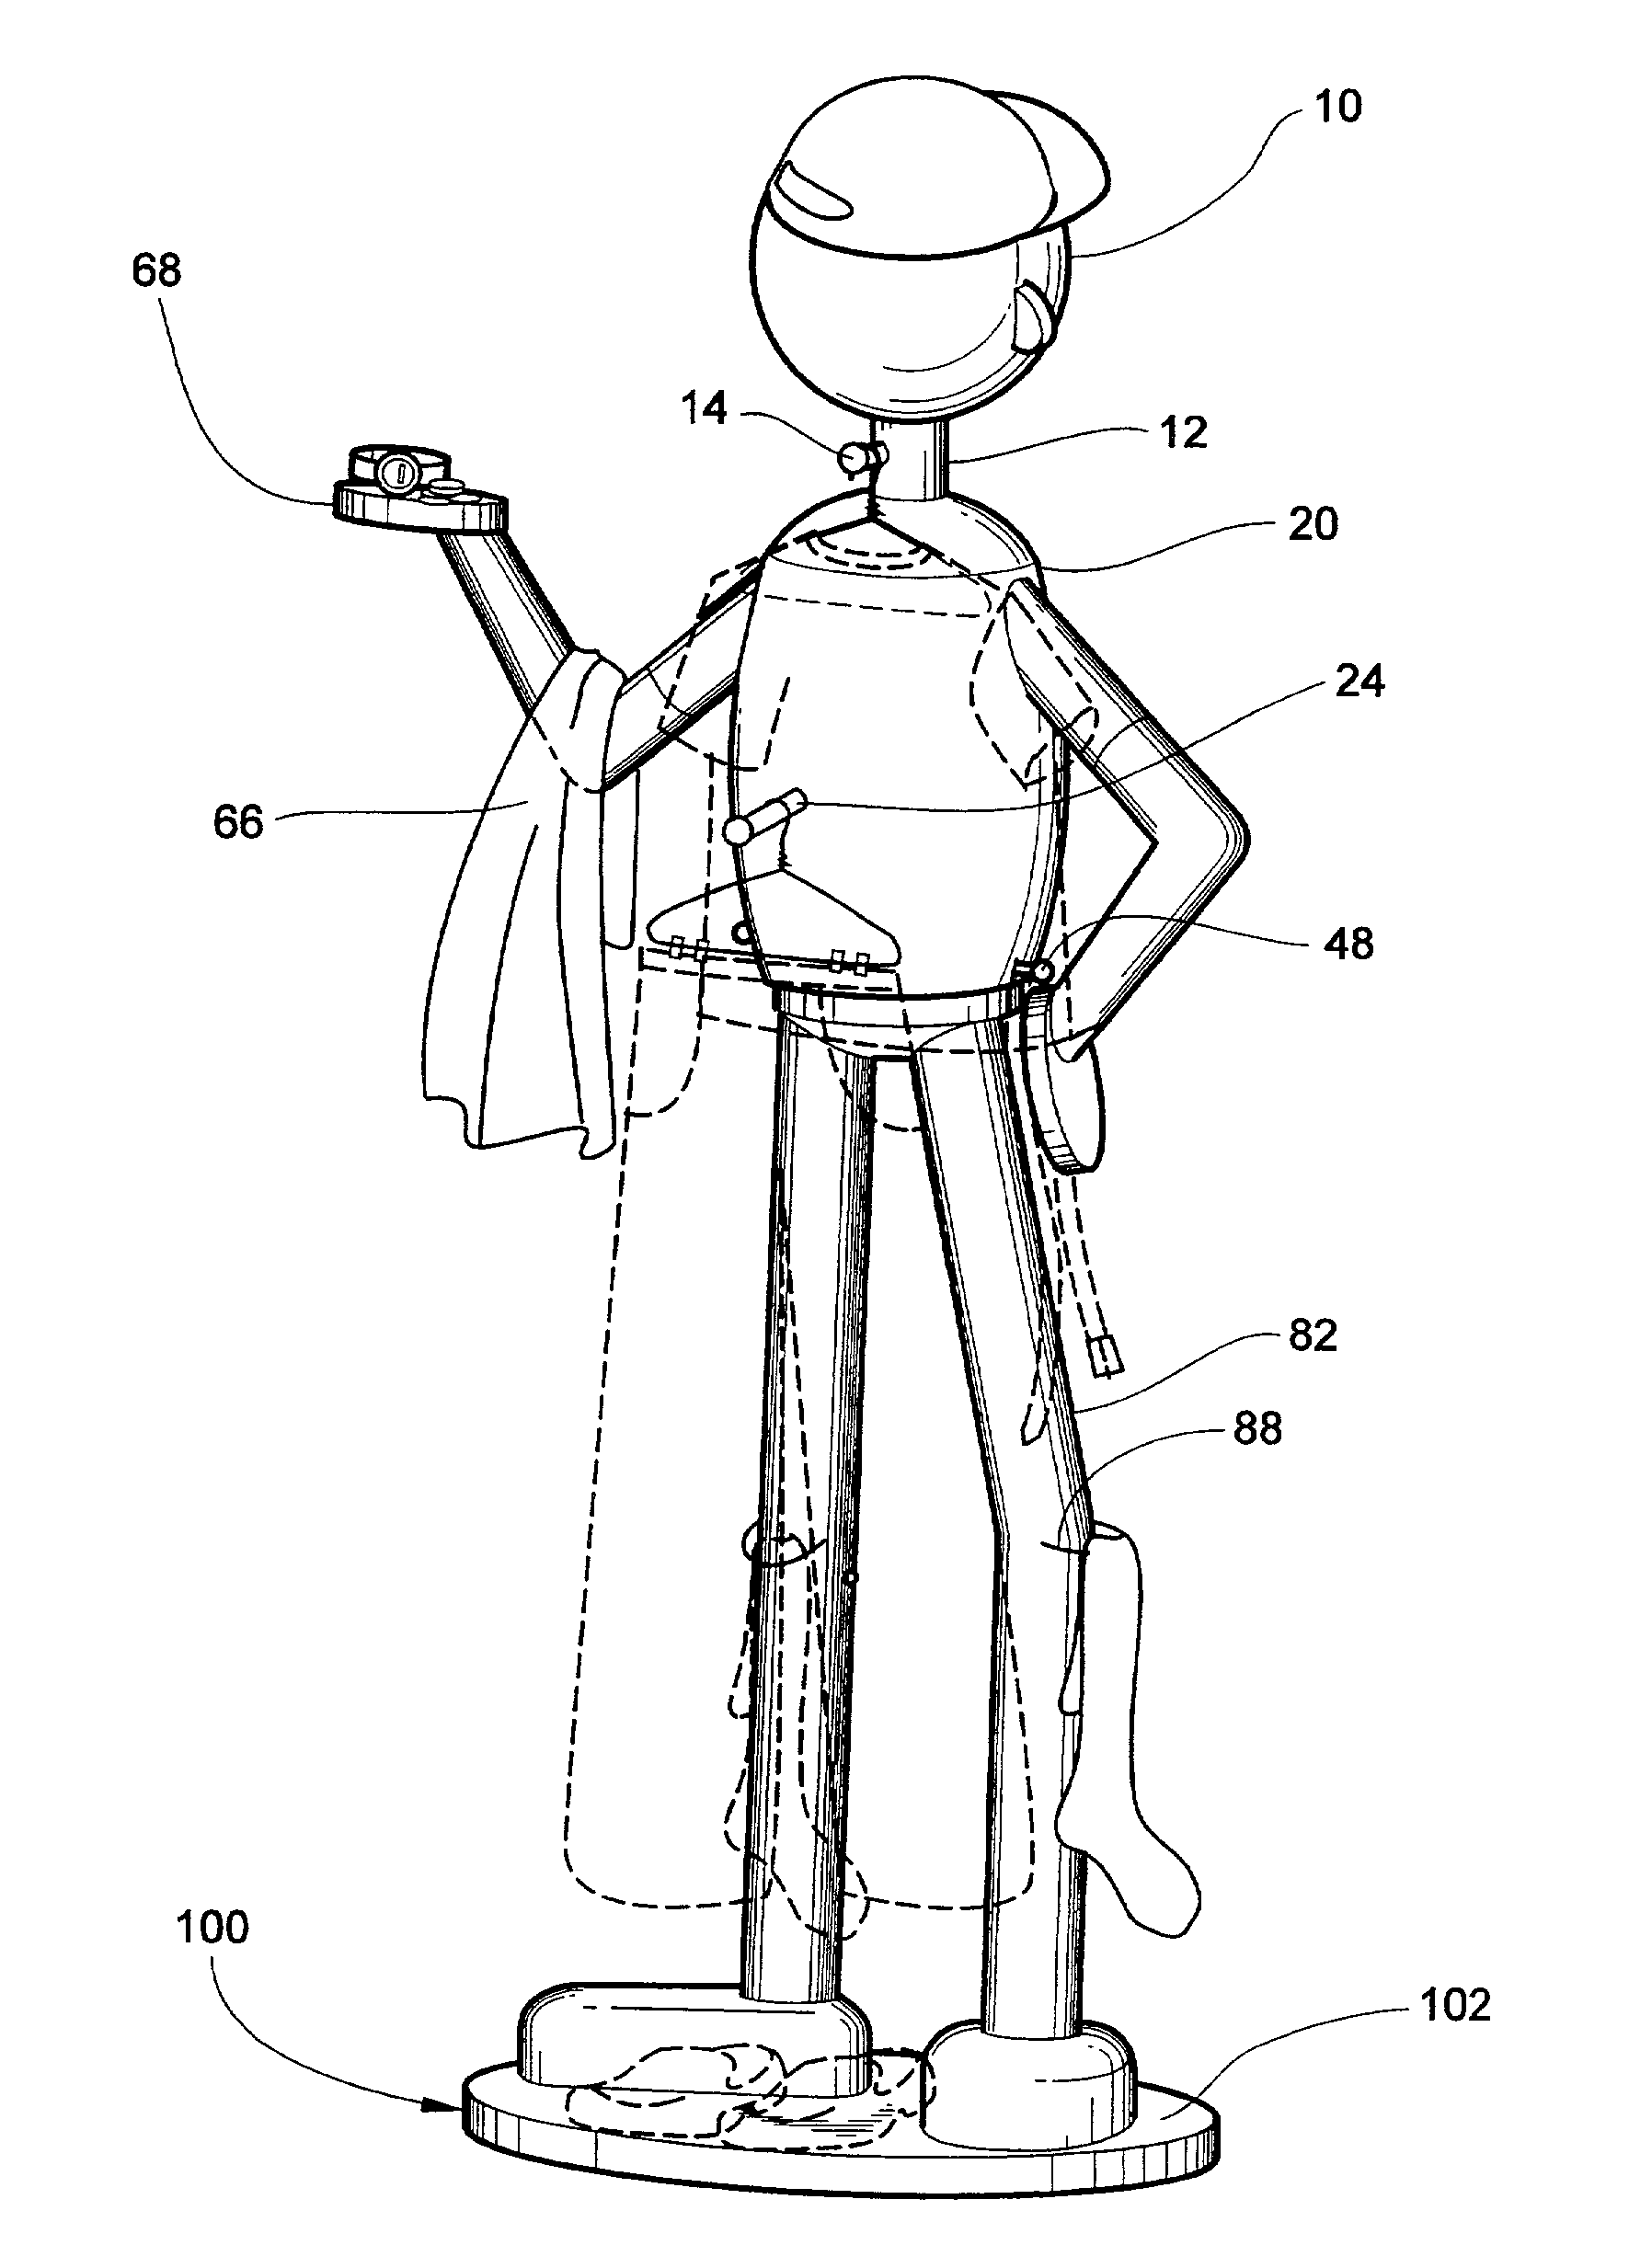 Apparatus for organizing and displaying clothing